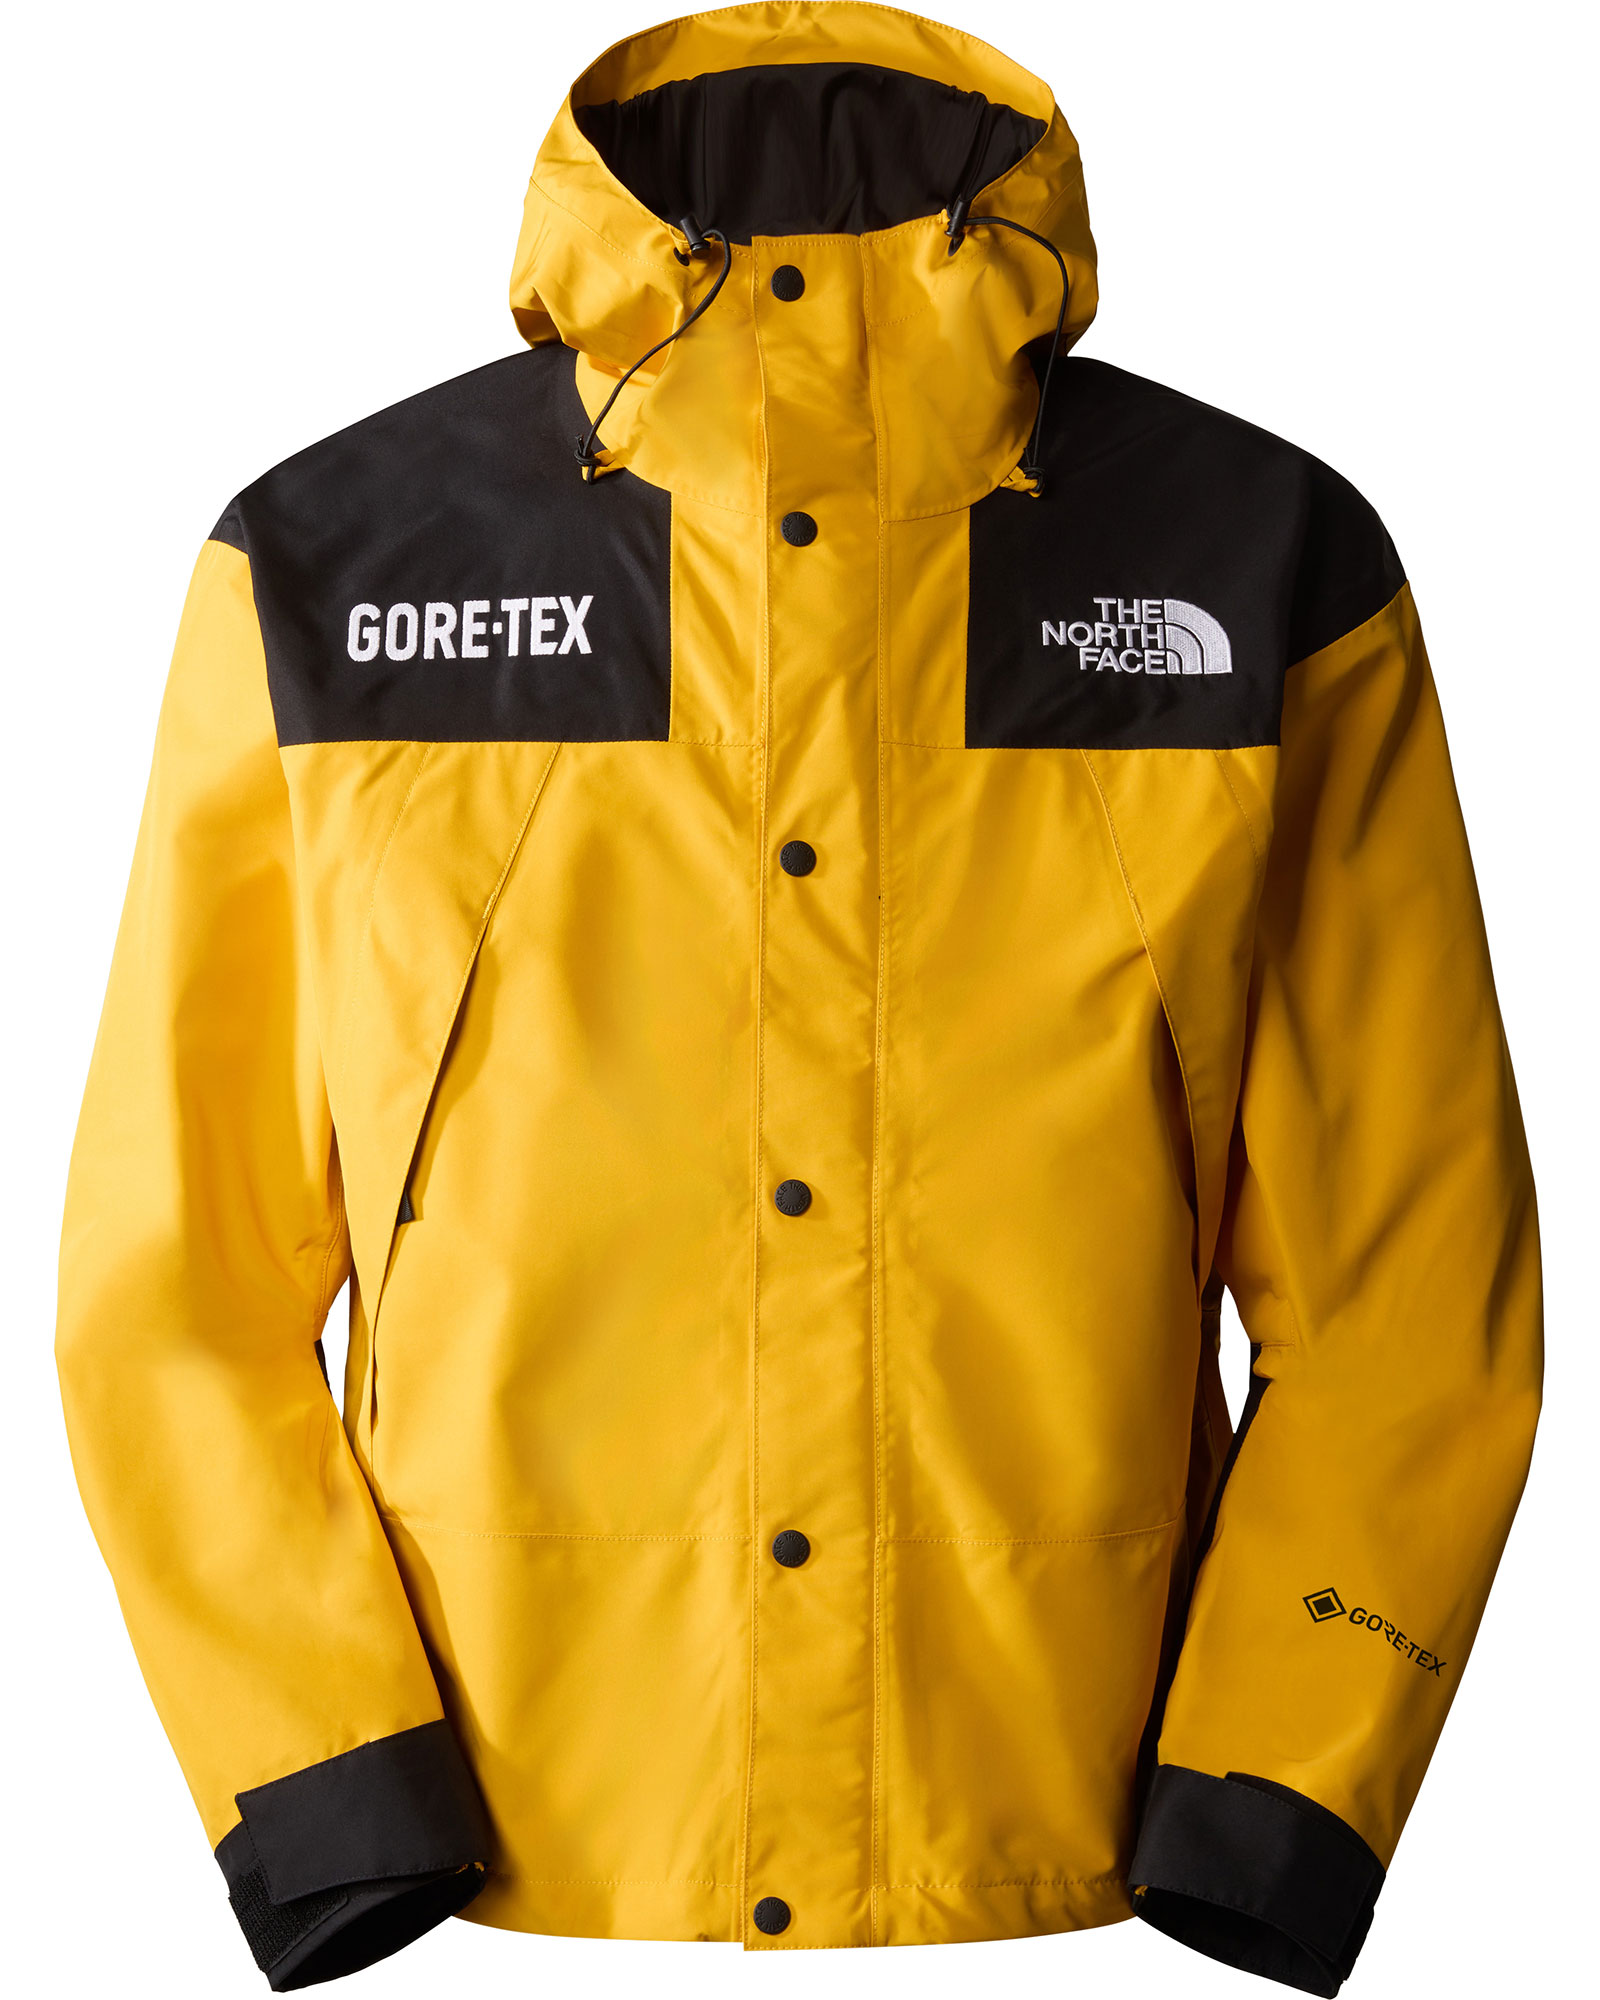 The North Face Men’s Mountain GORE TEX Jacket - Summit Gold-TNF Black S